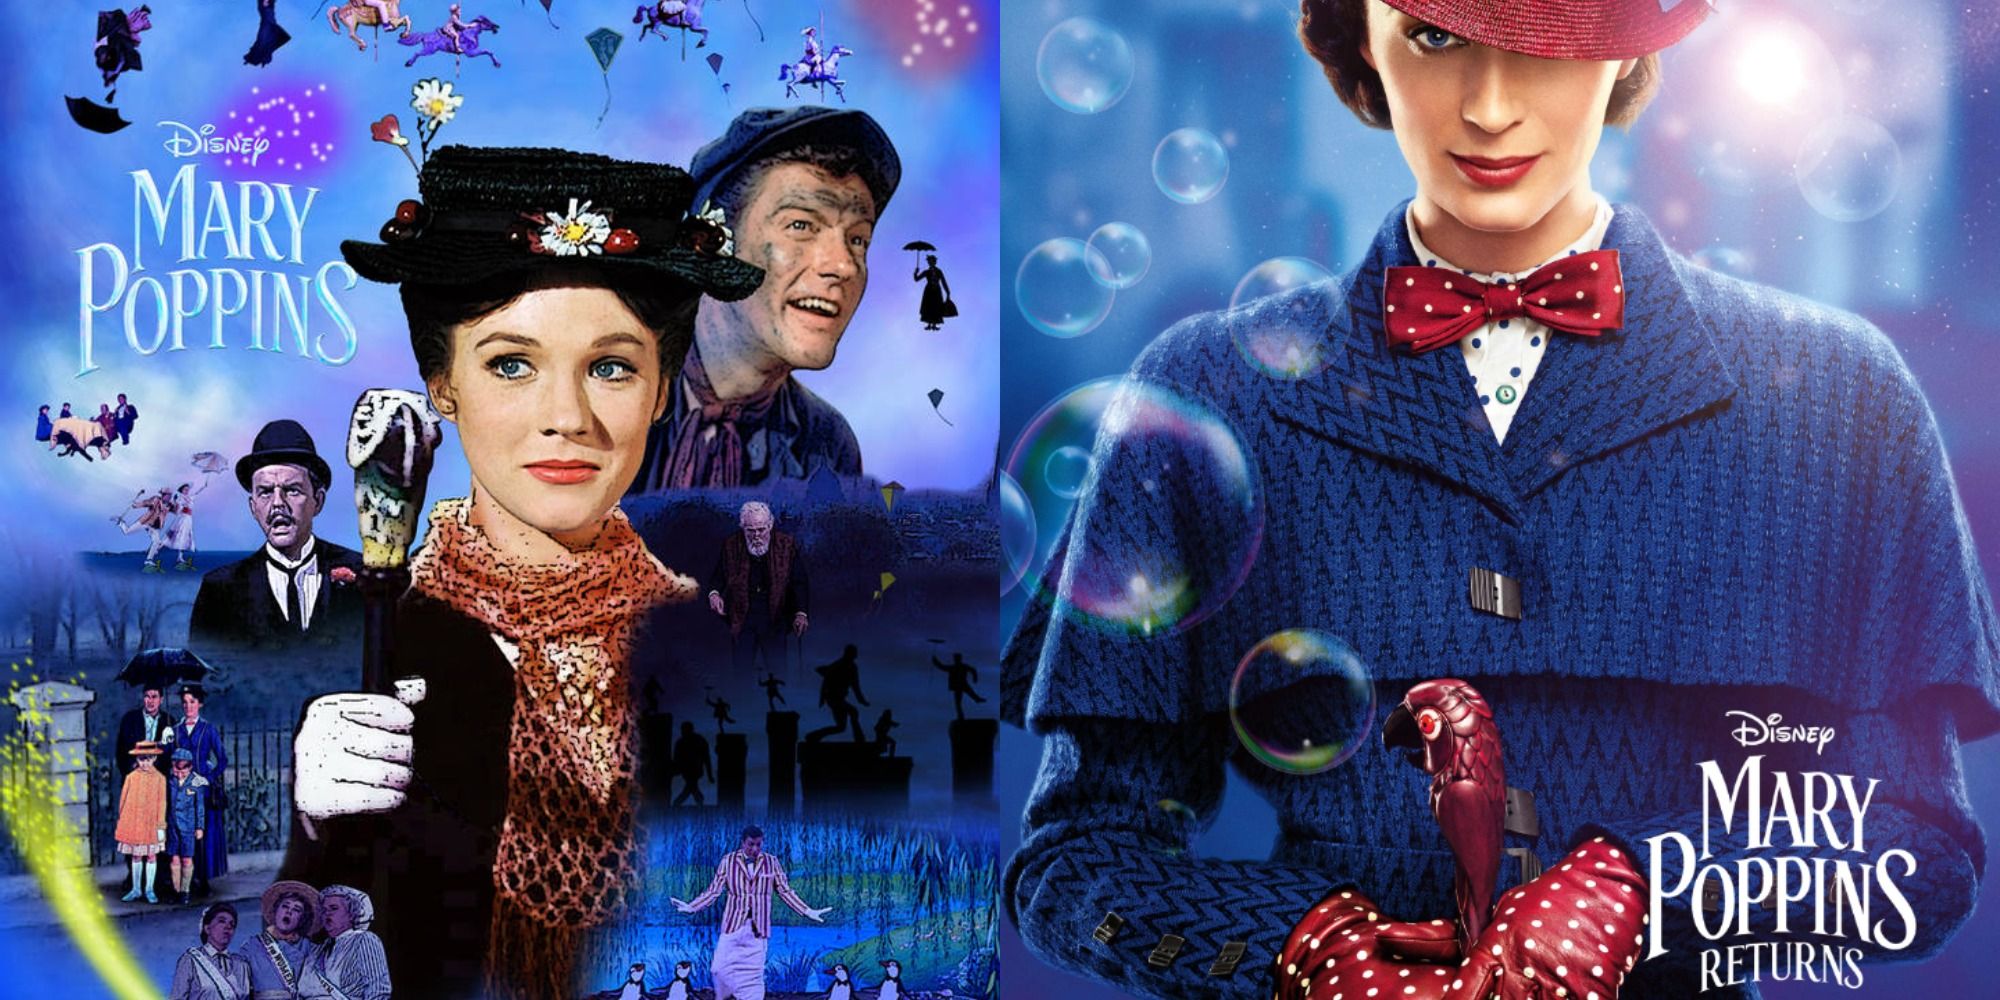 combined posters for Mary Poppins 1 and Returns featuring Julie Andrews and Emily Blunt